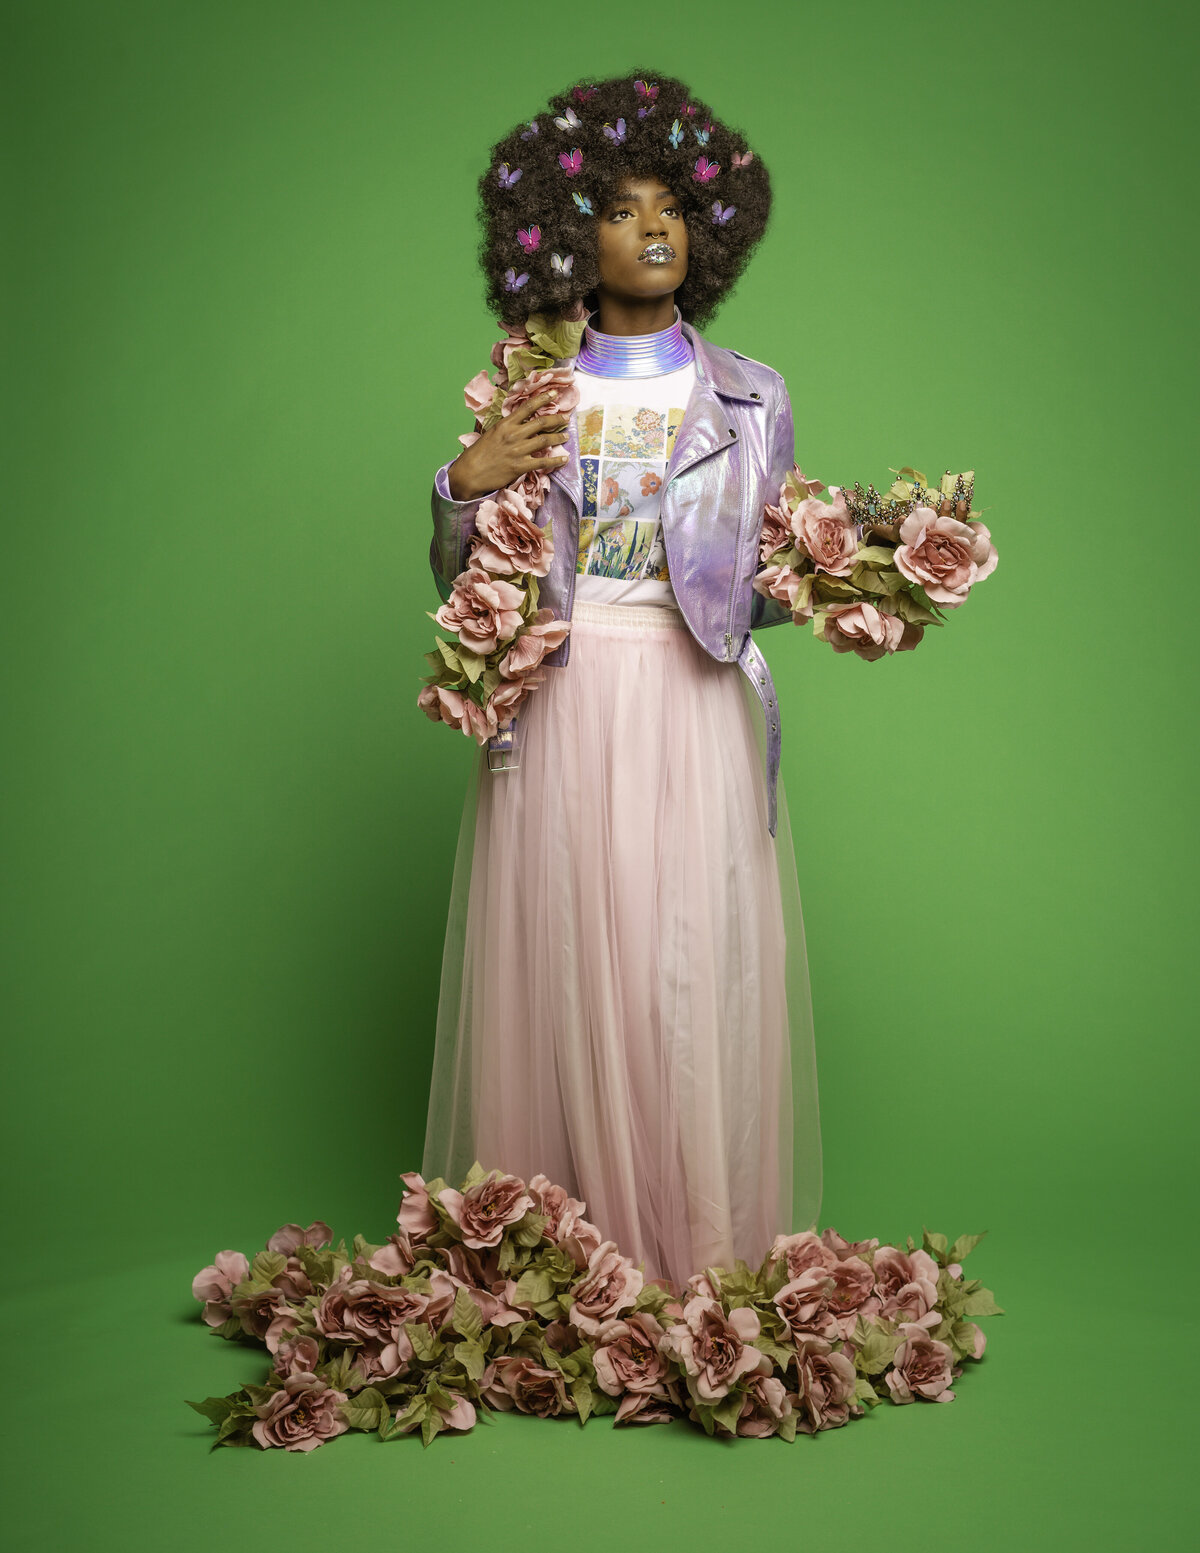 Black woman with afro in purple jacket and pink skirt with flowers